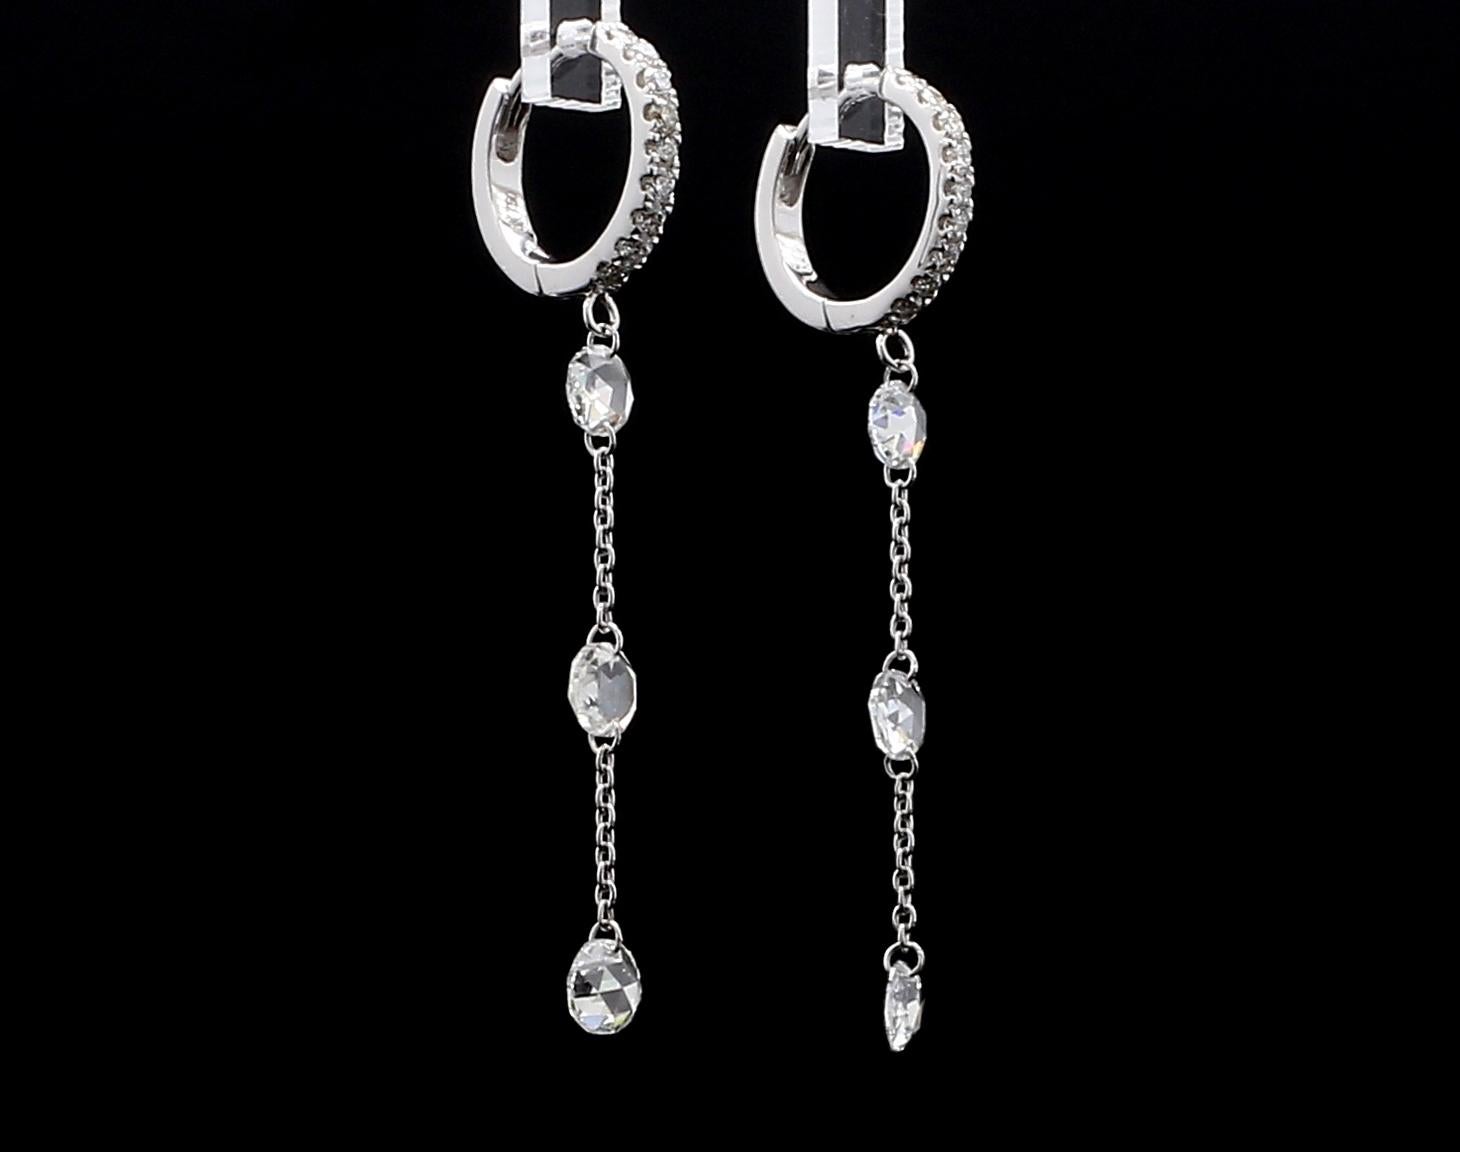 PANIM 1 Carat White Diamond Rosecut Drop Earrings in 18 Karat White Gold

Simply Beautiful Rosecut and Briolette Earrings which can be worn daily for work as well as casual meetings.

Available all gold colors 18K White/Yellow /RoseGold

Diamonds